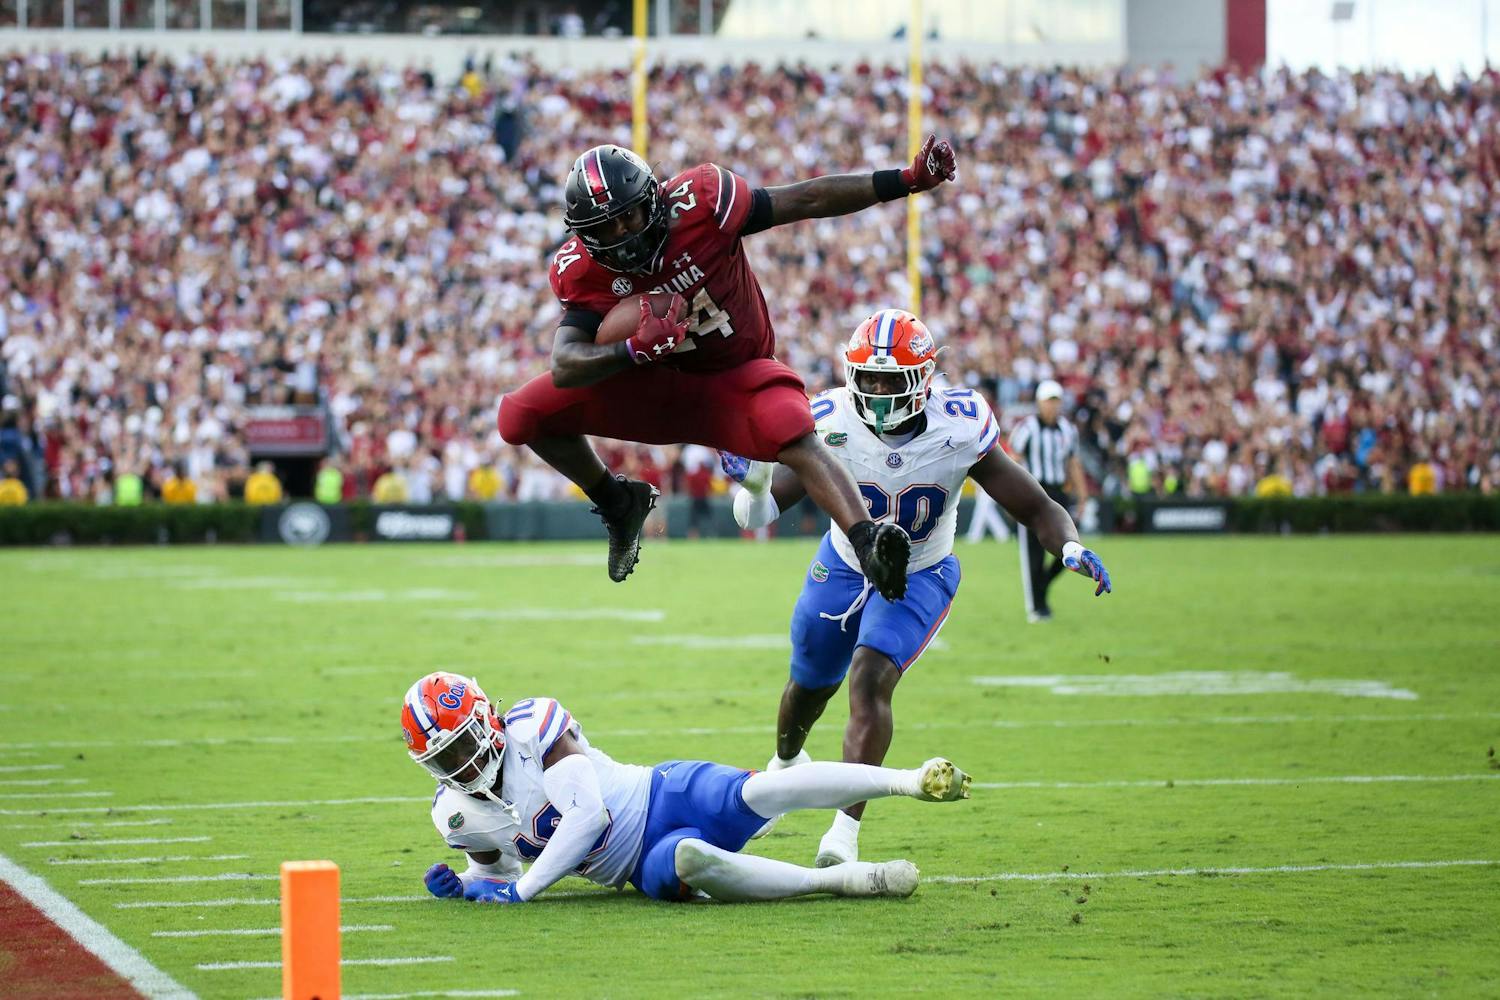 The South Carolina ɫɫƵs lost to the Florida Gators 41-39 in their fourth Southeastern Conference matchup of the season at Williams-Brice Stadium on Oct. 14, 2023. This loss puts the ɫɫƵs at 2-4 for the season.